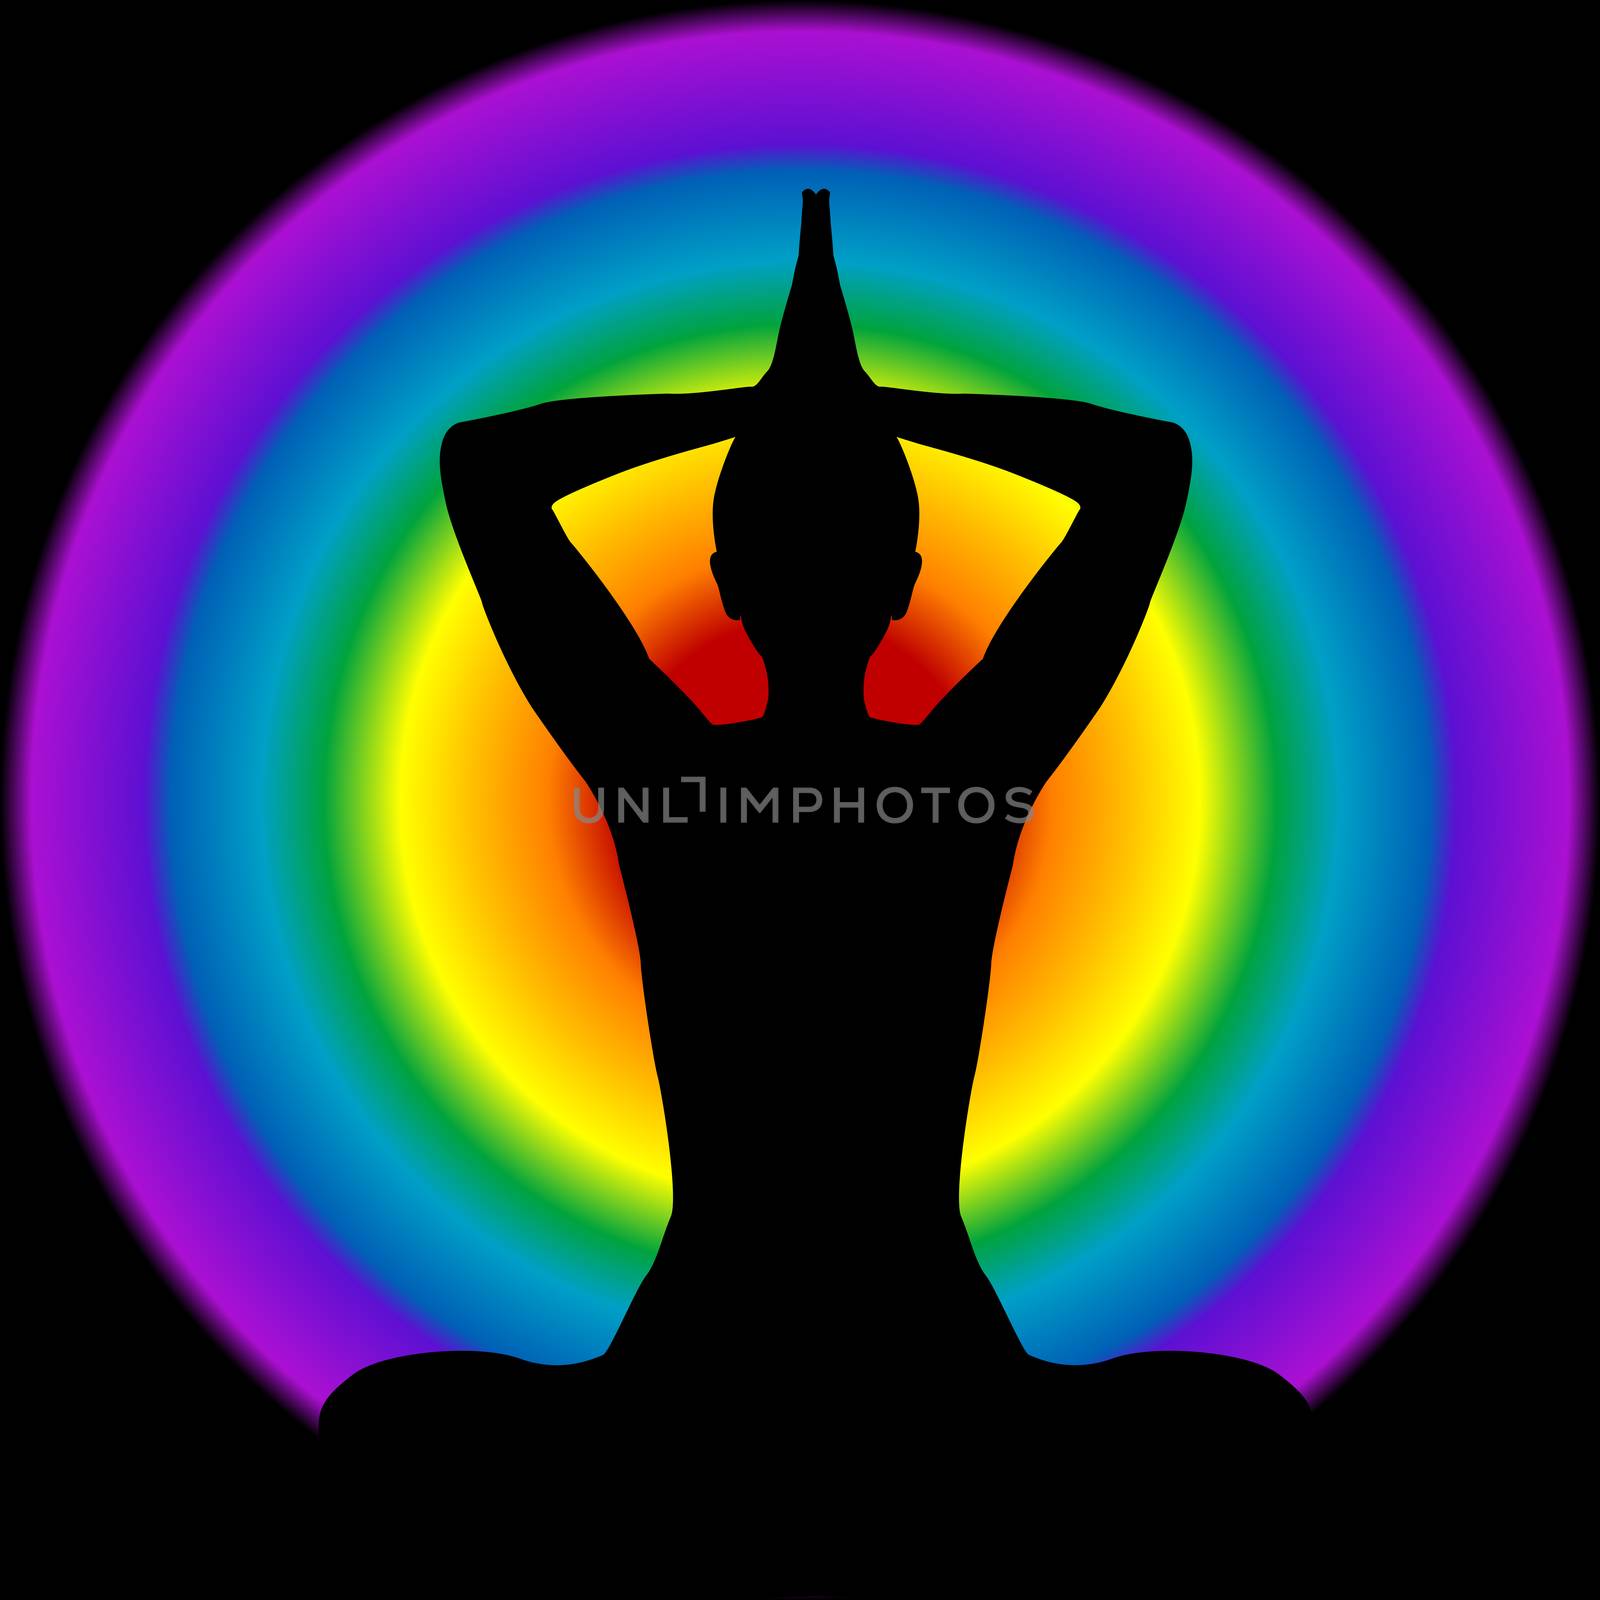 Human silhouette in yoga pose with aura and chakras colors on background